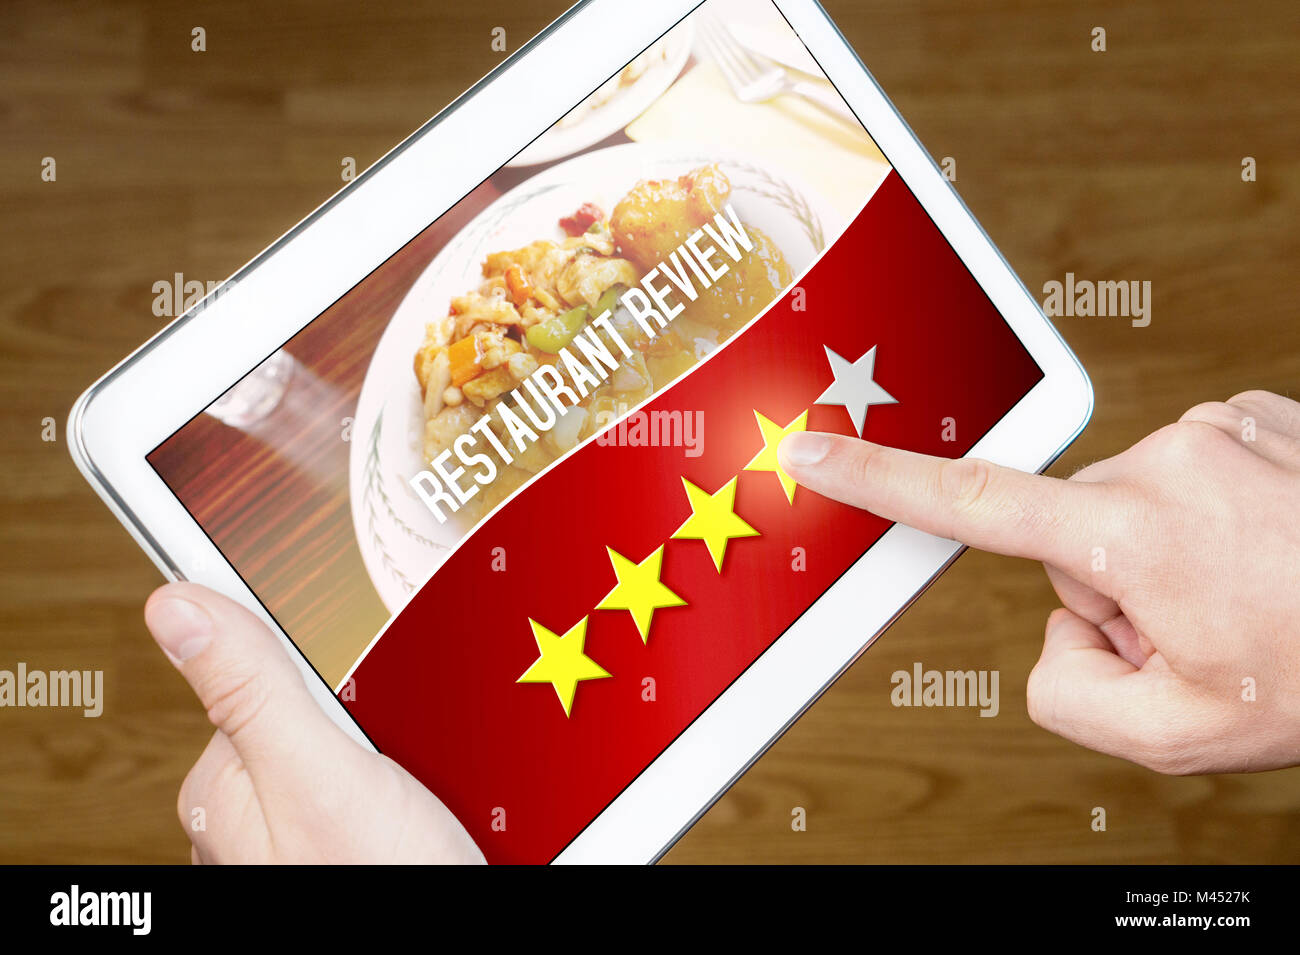 Good restaurant review. Satisfied and happy customer giving great rating with tablet on an imaginary criticism site, application or website. 4/5 stars Stock Photo